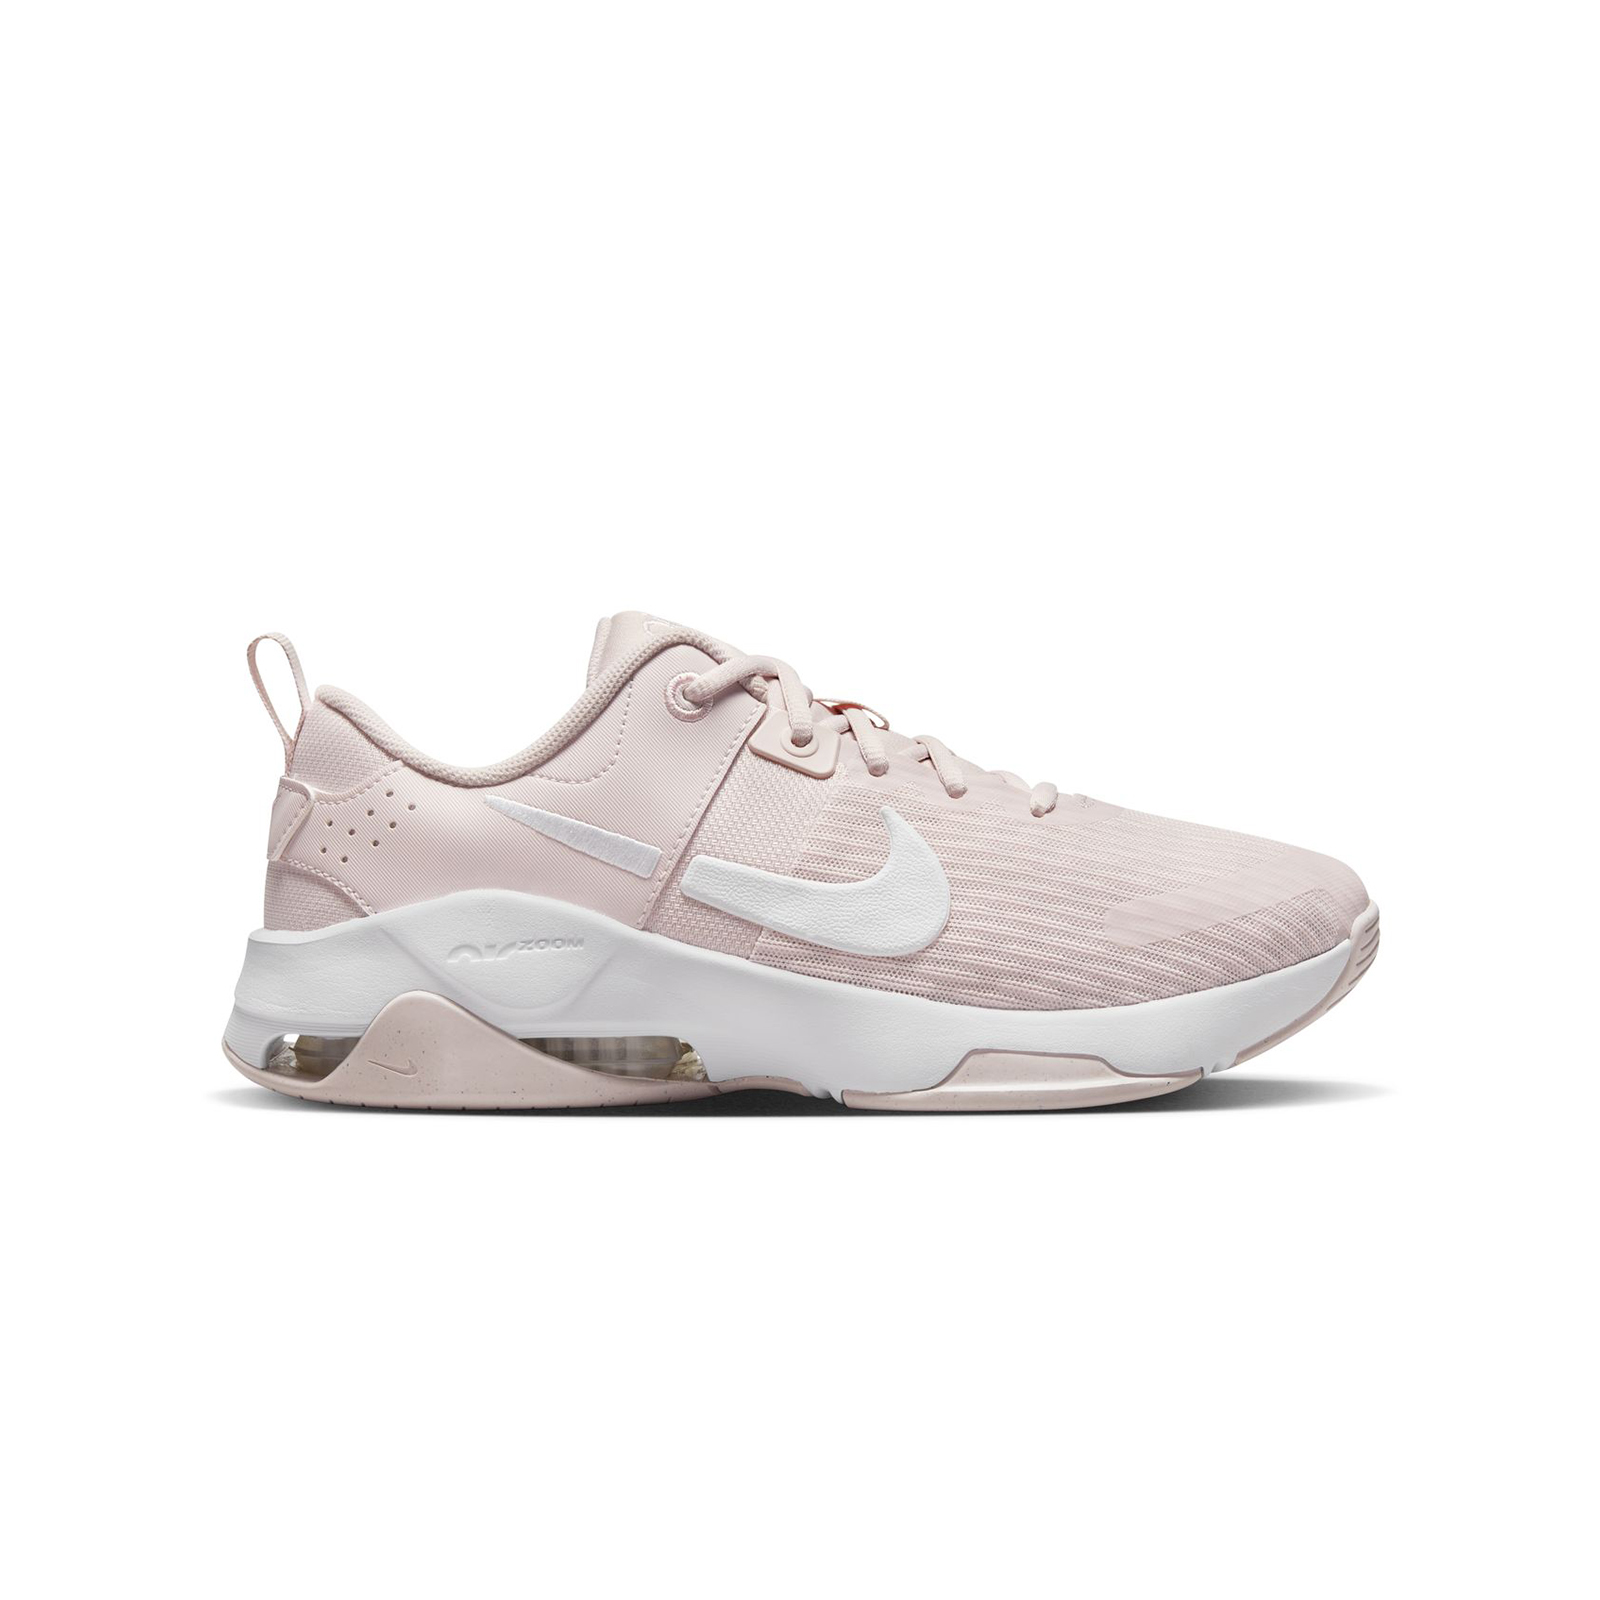 Nike - NIKE ZOOM BELLA 6 - BARELY ROSE/WHITE-DIFFUSED TAUPE Γυναικεία > Παπούτσια > Αθλητικά > Παπούτσι Low Cut